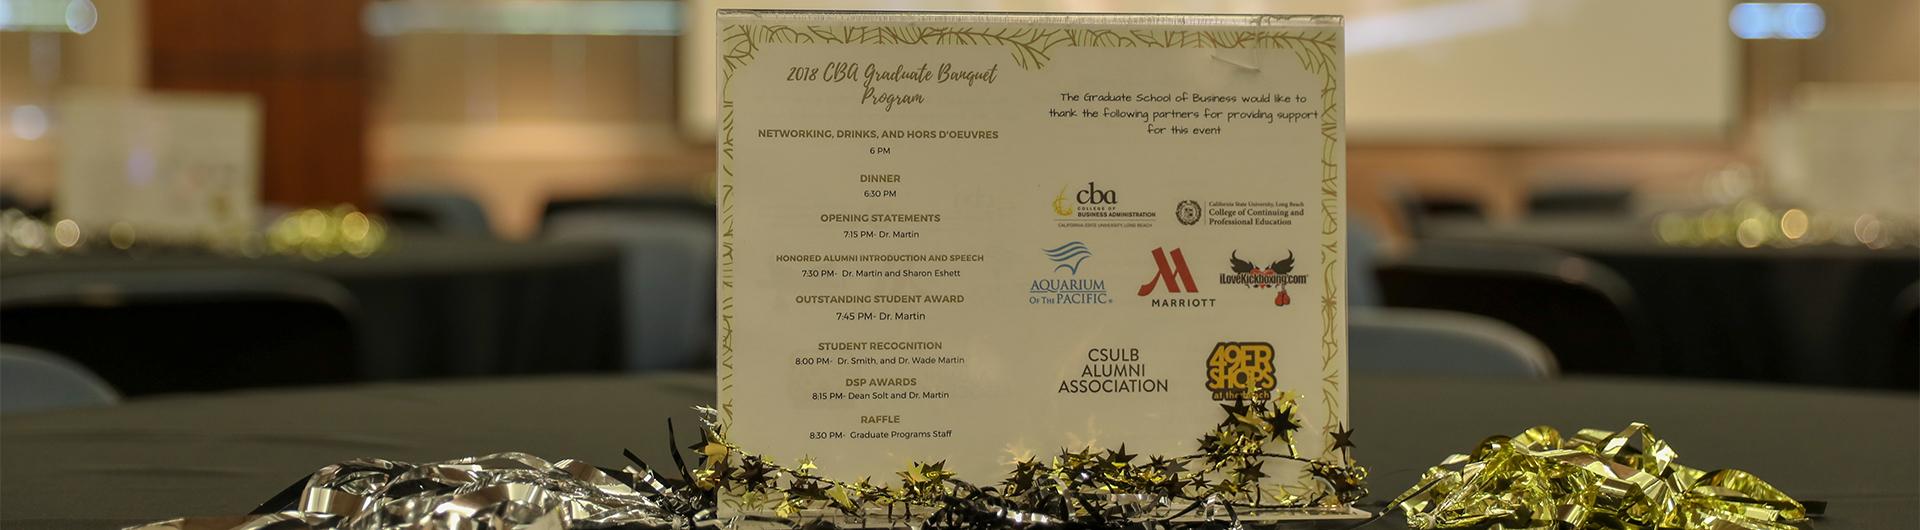 CSULB College of Business Graduate Banquet Table and Program